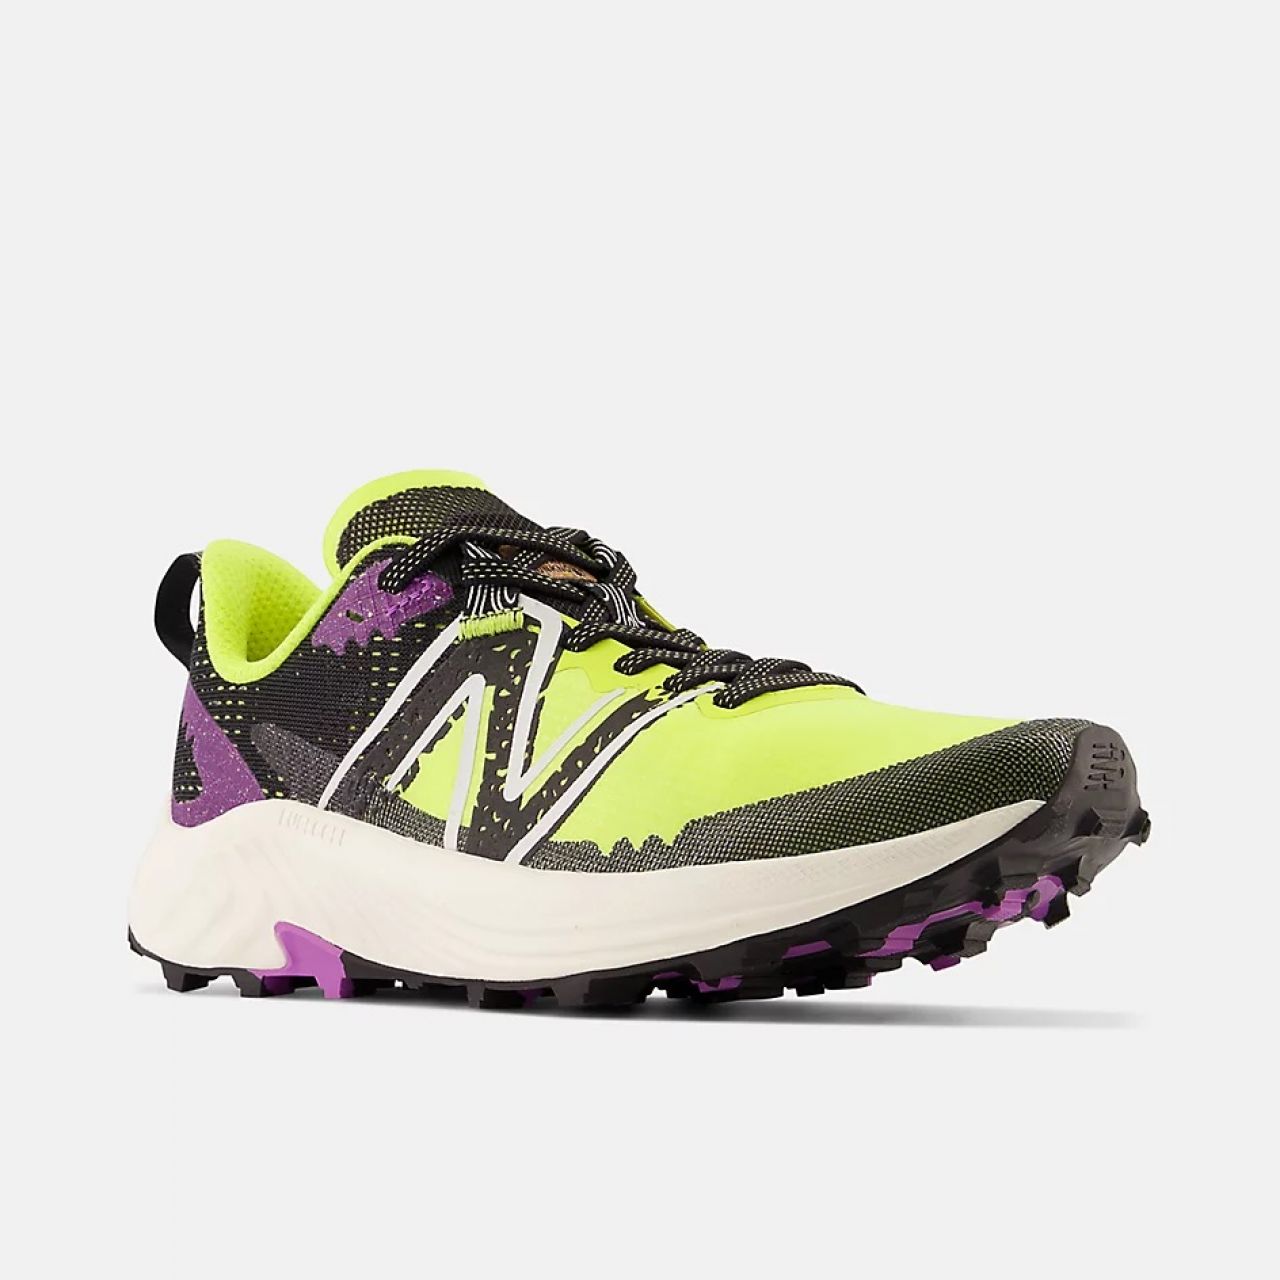 NEW BALANCE FUELCELL SUMMIT UNKNOWN V3 chaussure de  trail femme